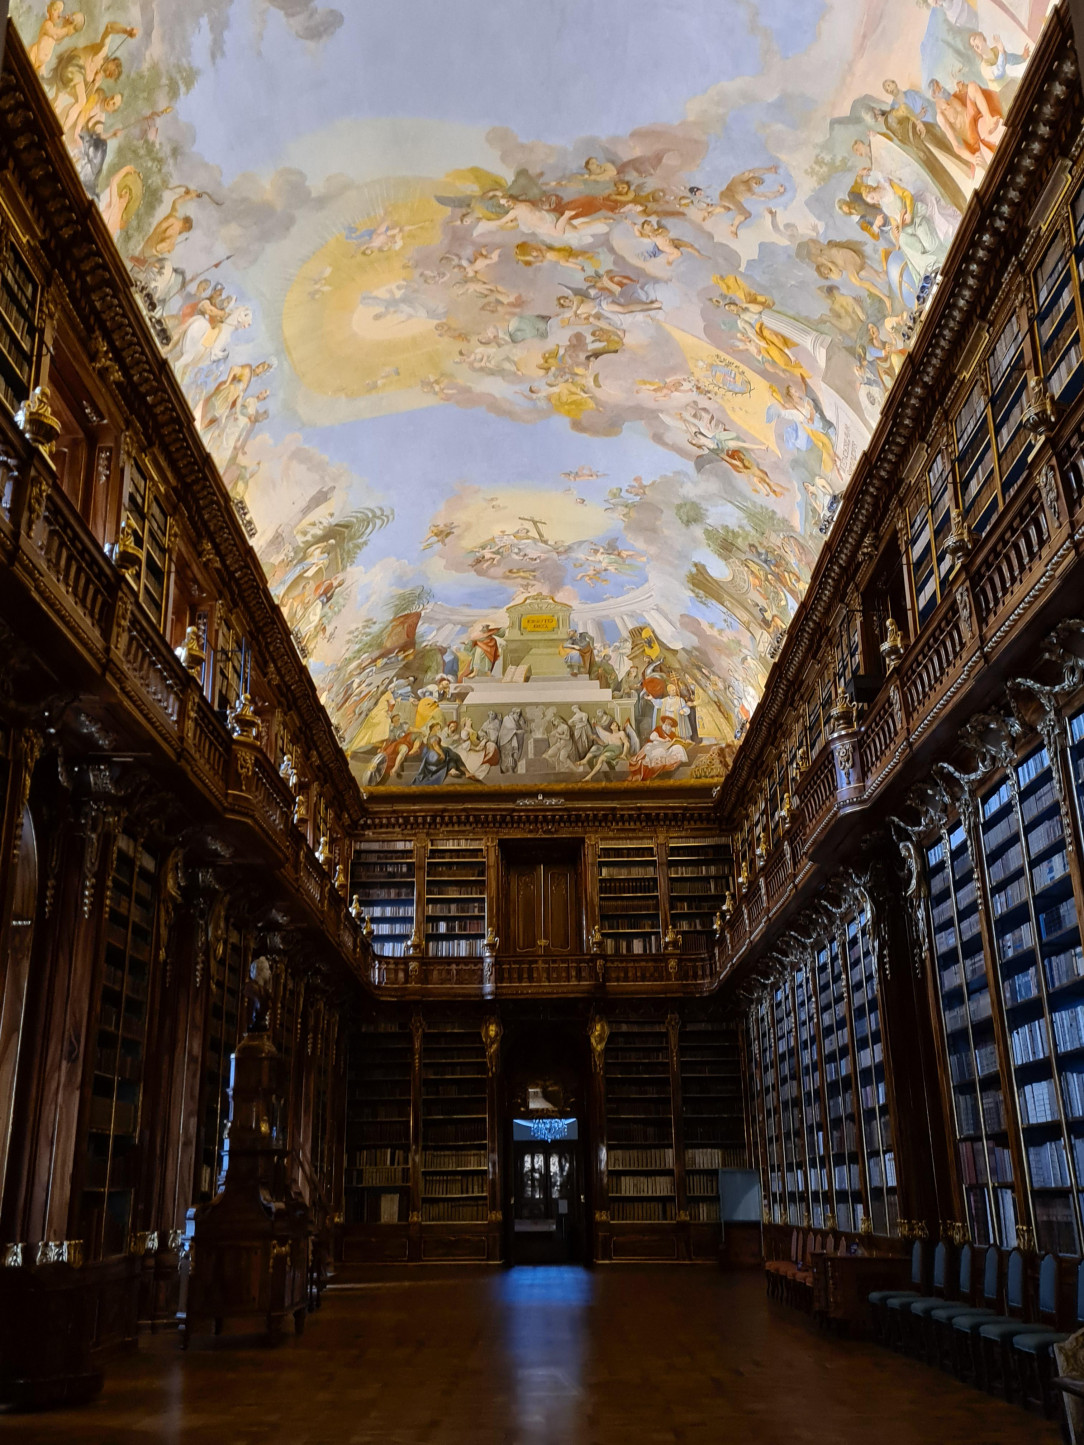 The ceiling of Strahov Monastery&#039;s Library in Prague, Czech Republic